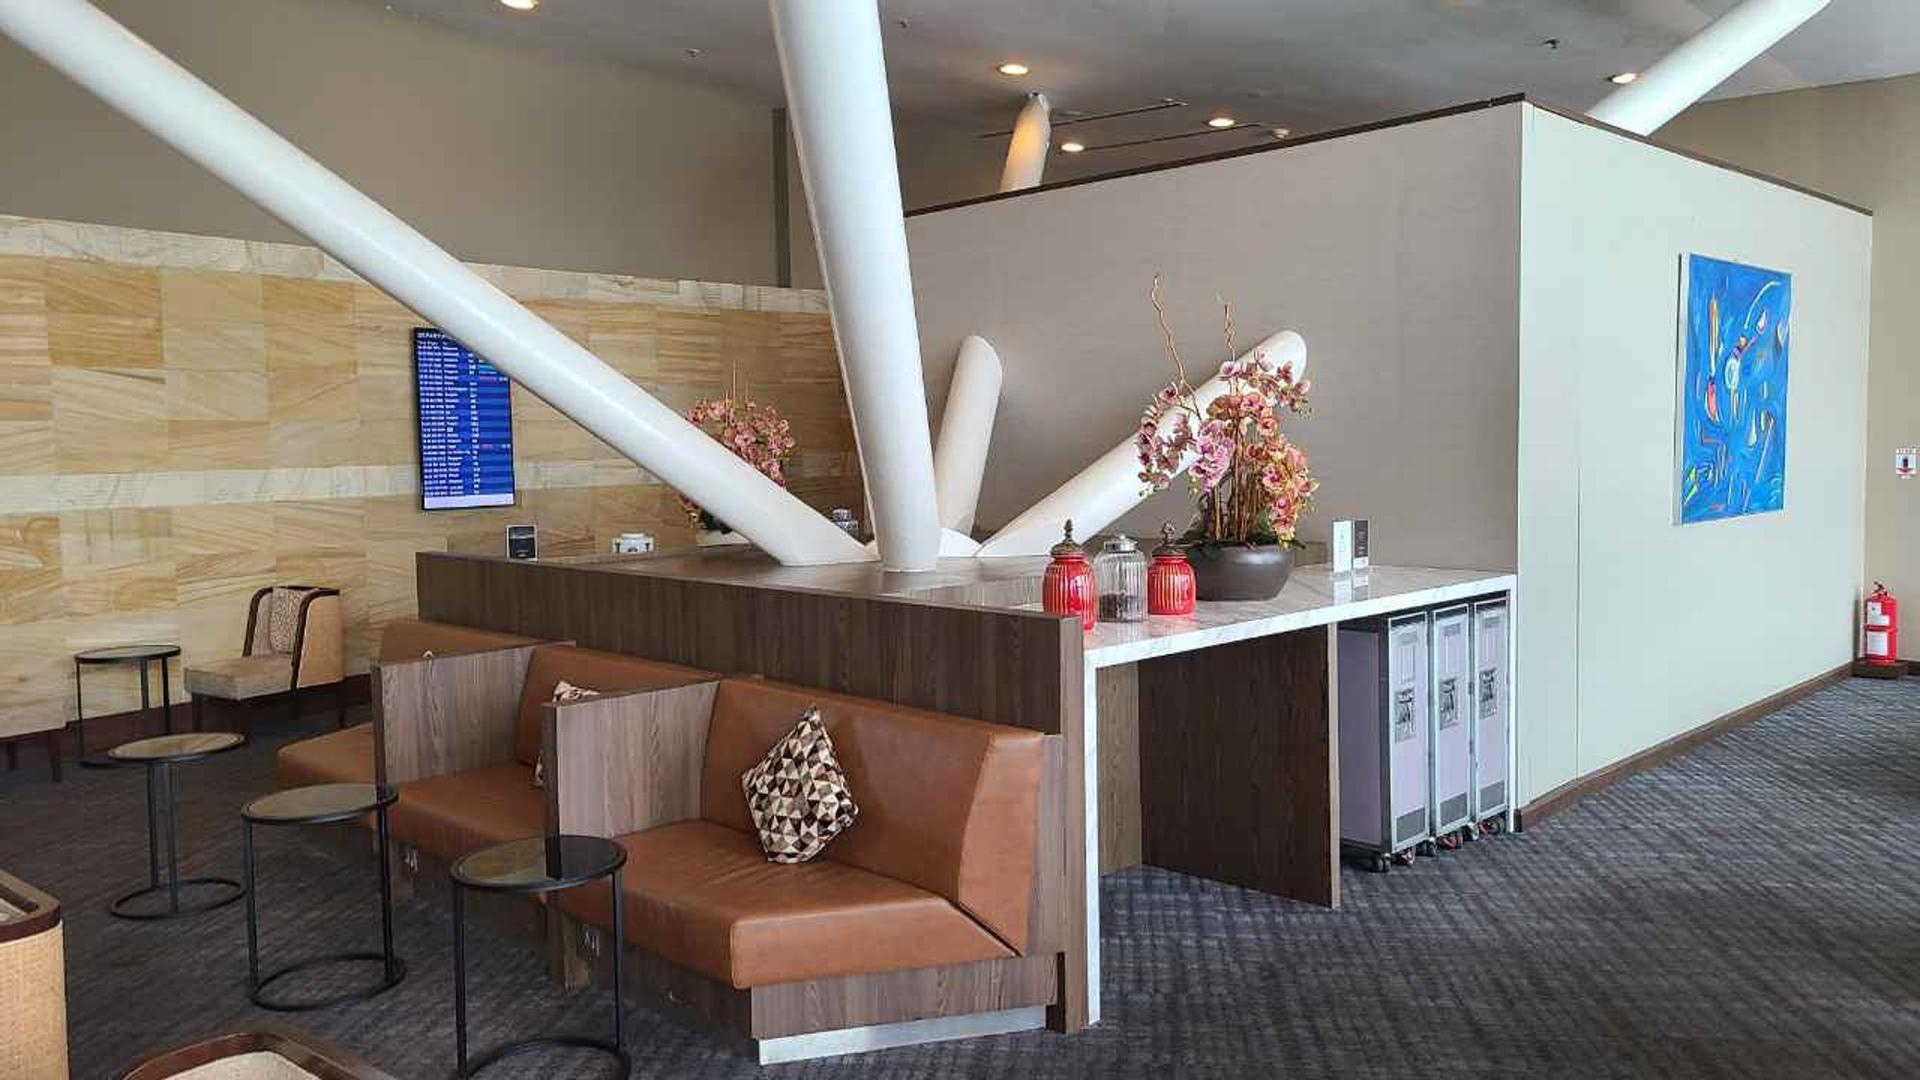 Malaysia Airlines Golden Lounge (Regional) image 5 of 13